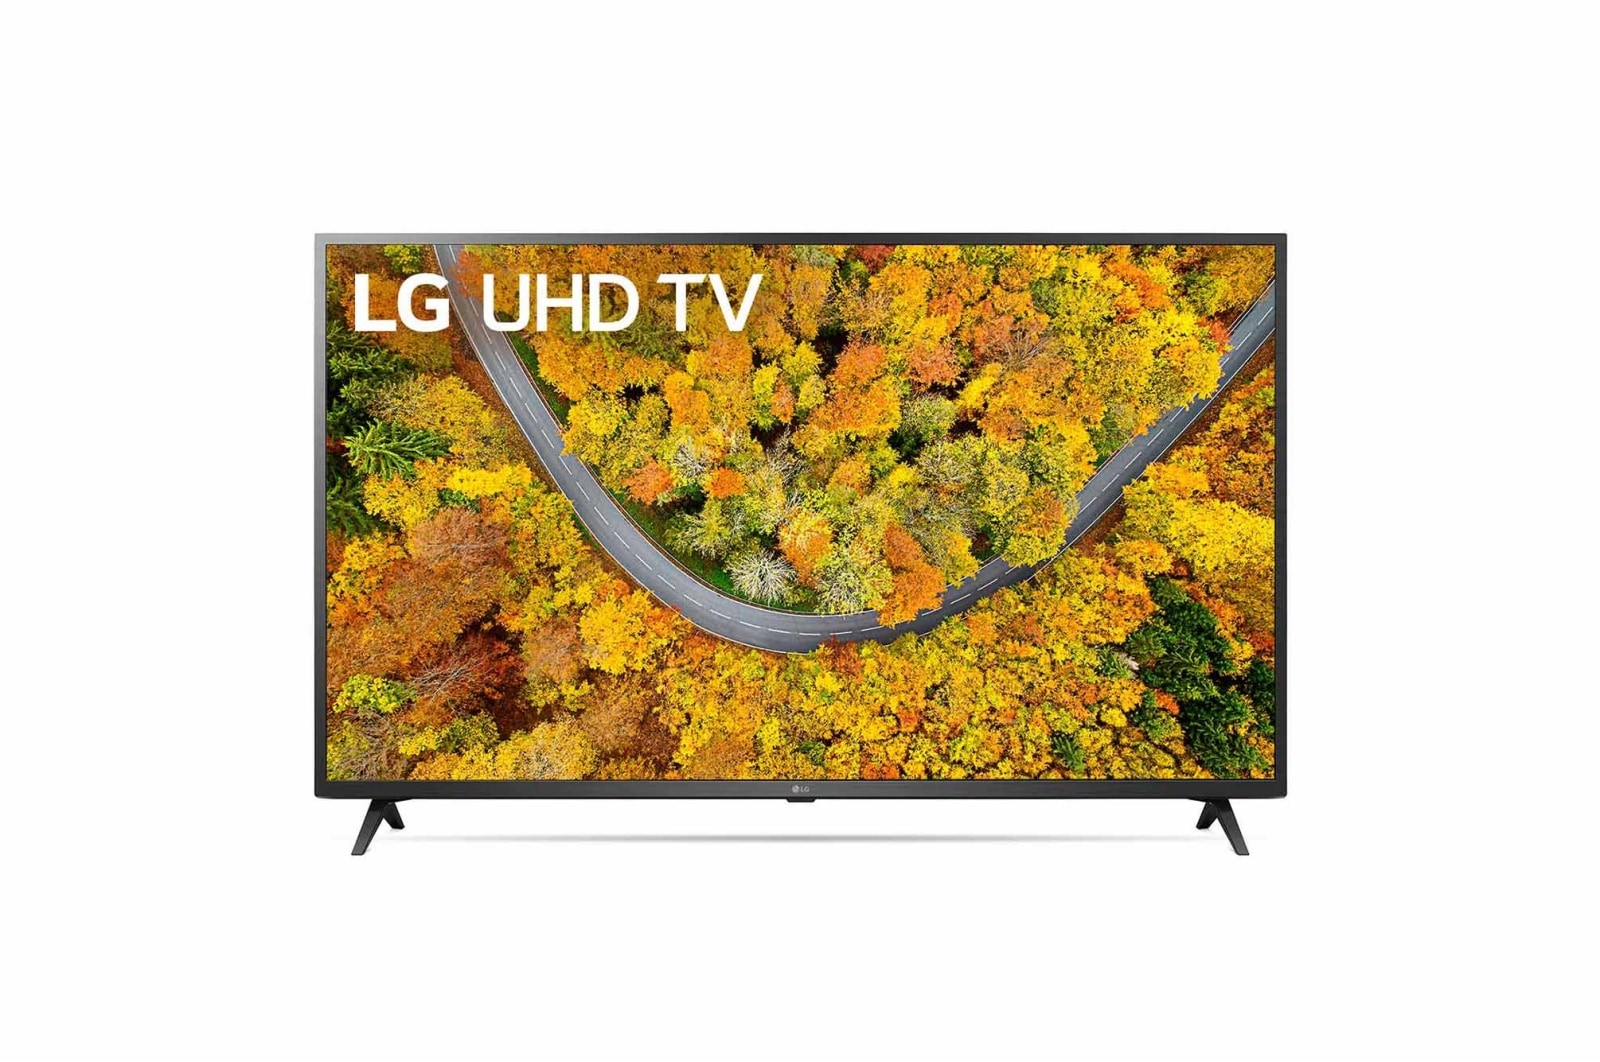 LG UP75 Series 55'' Smart UHD TV with AI ThinQ®